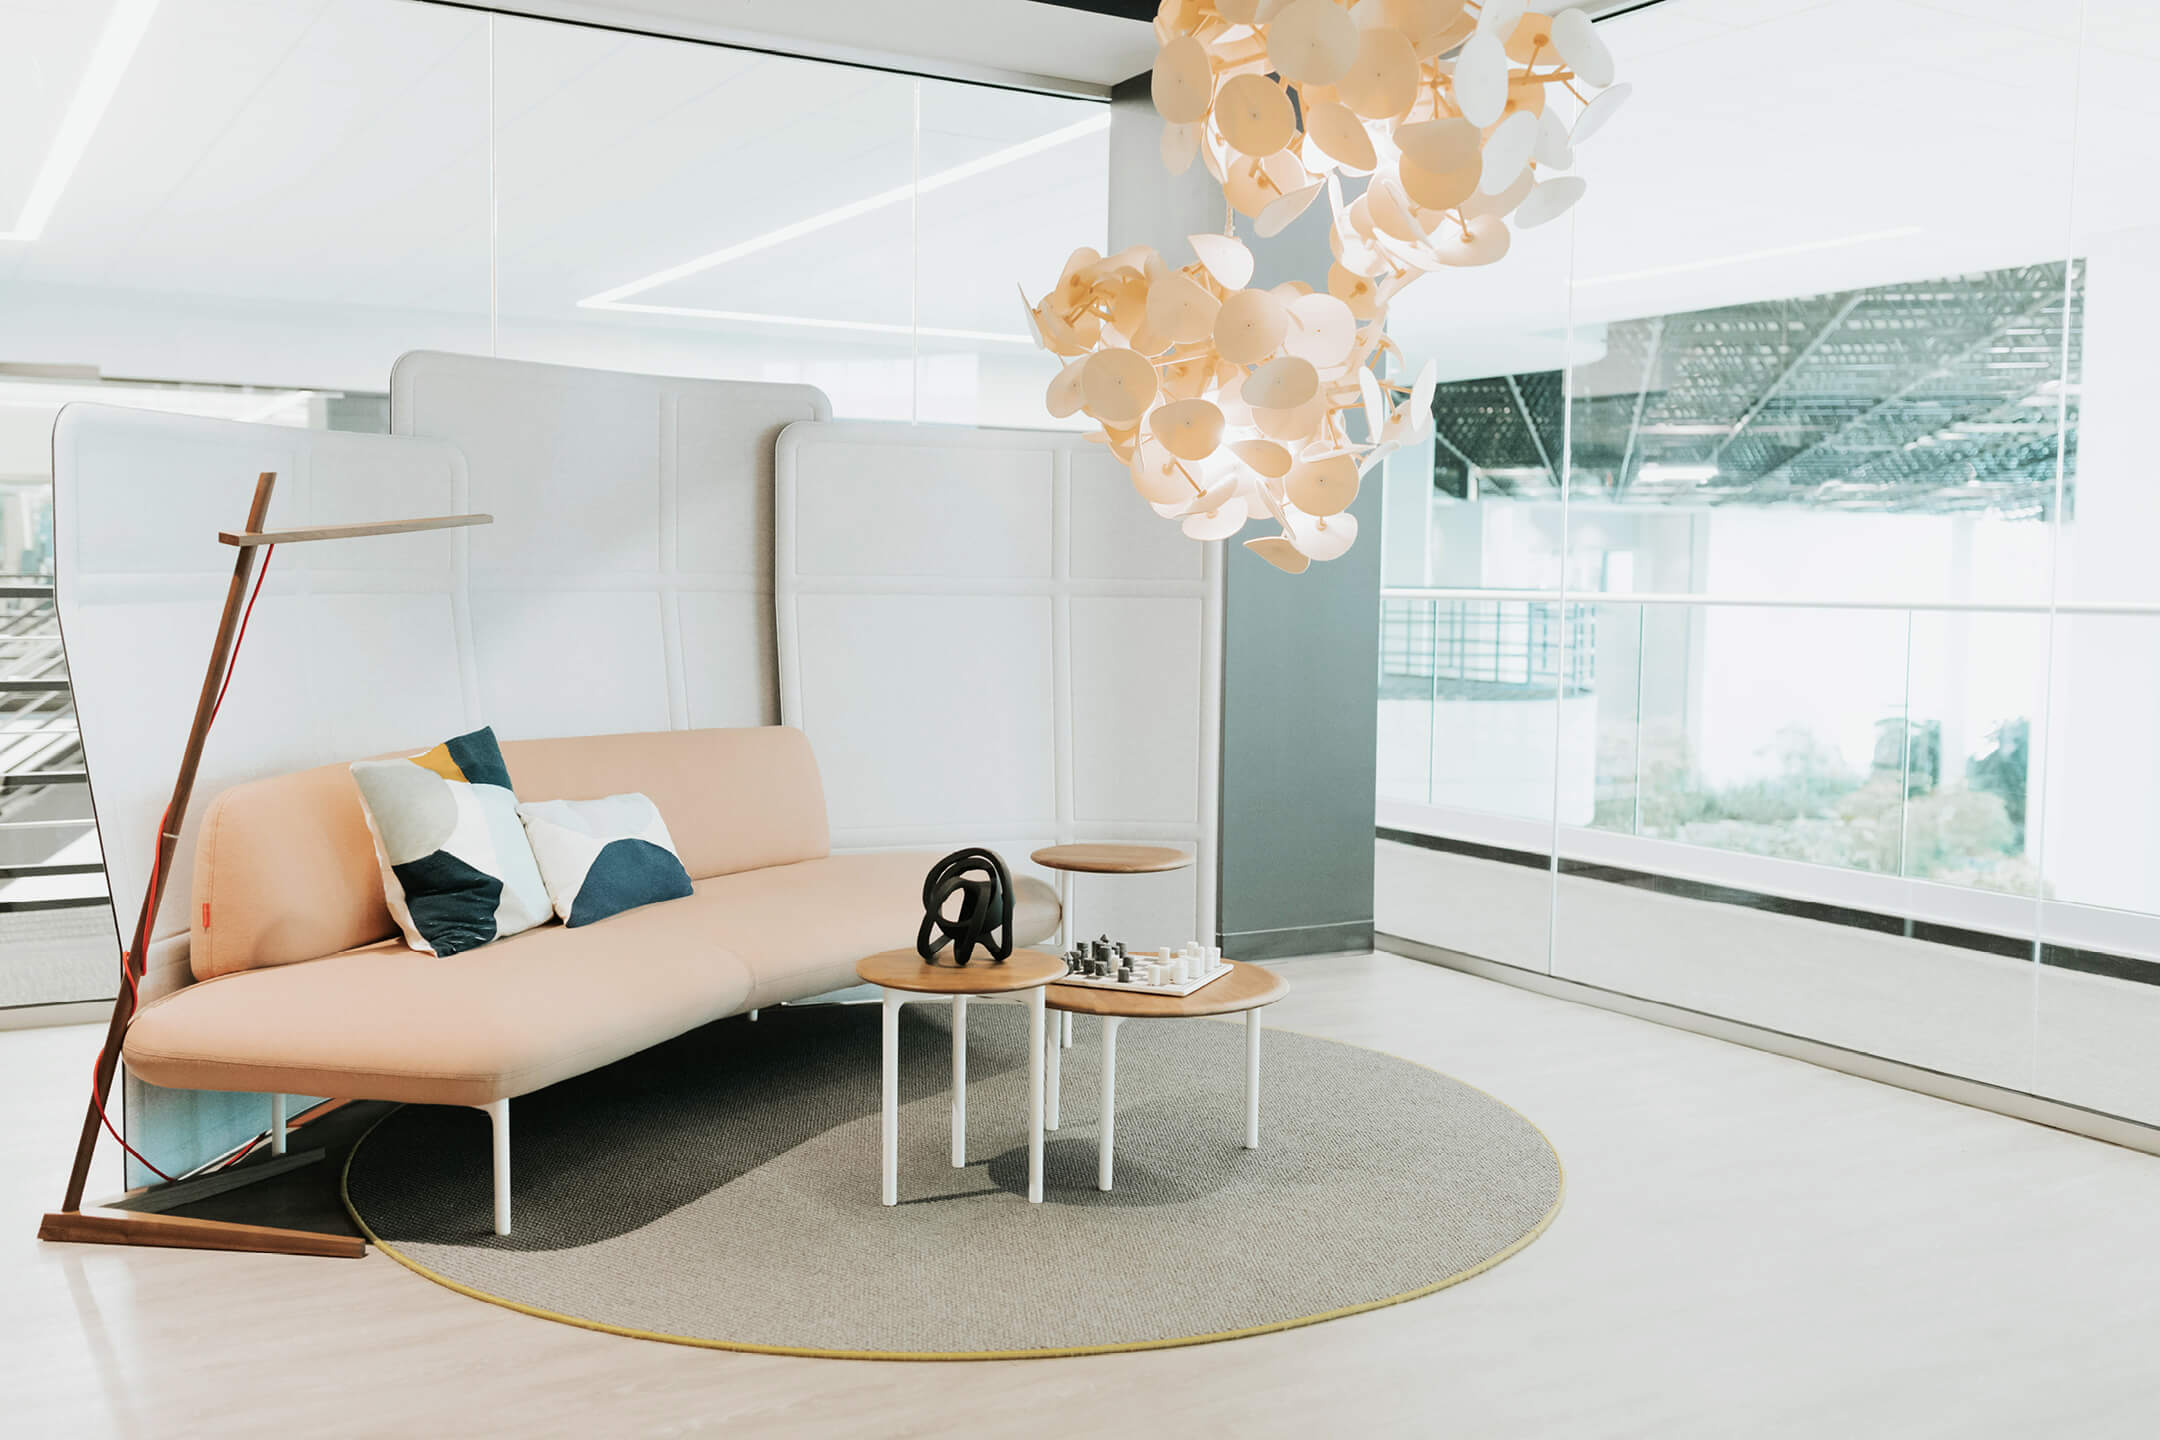 Haworth Patricia Urquiola Designs in private office space with couch and table set up